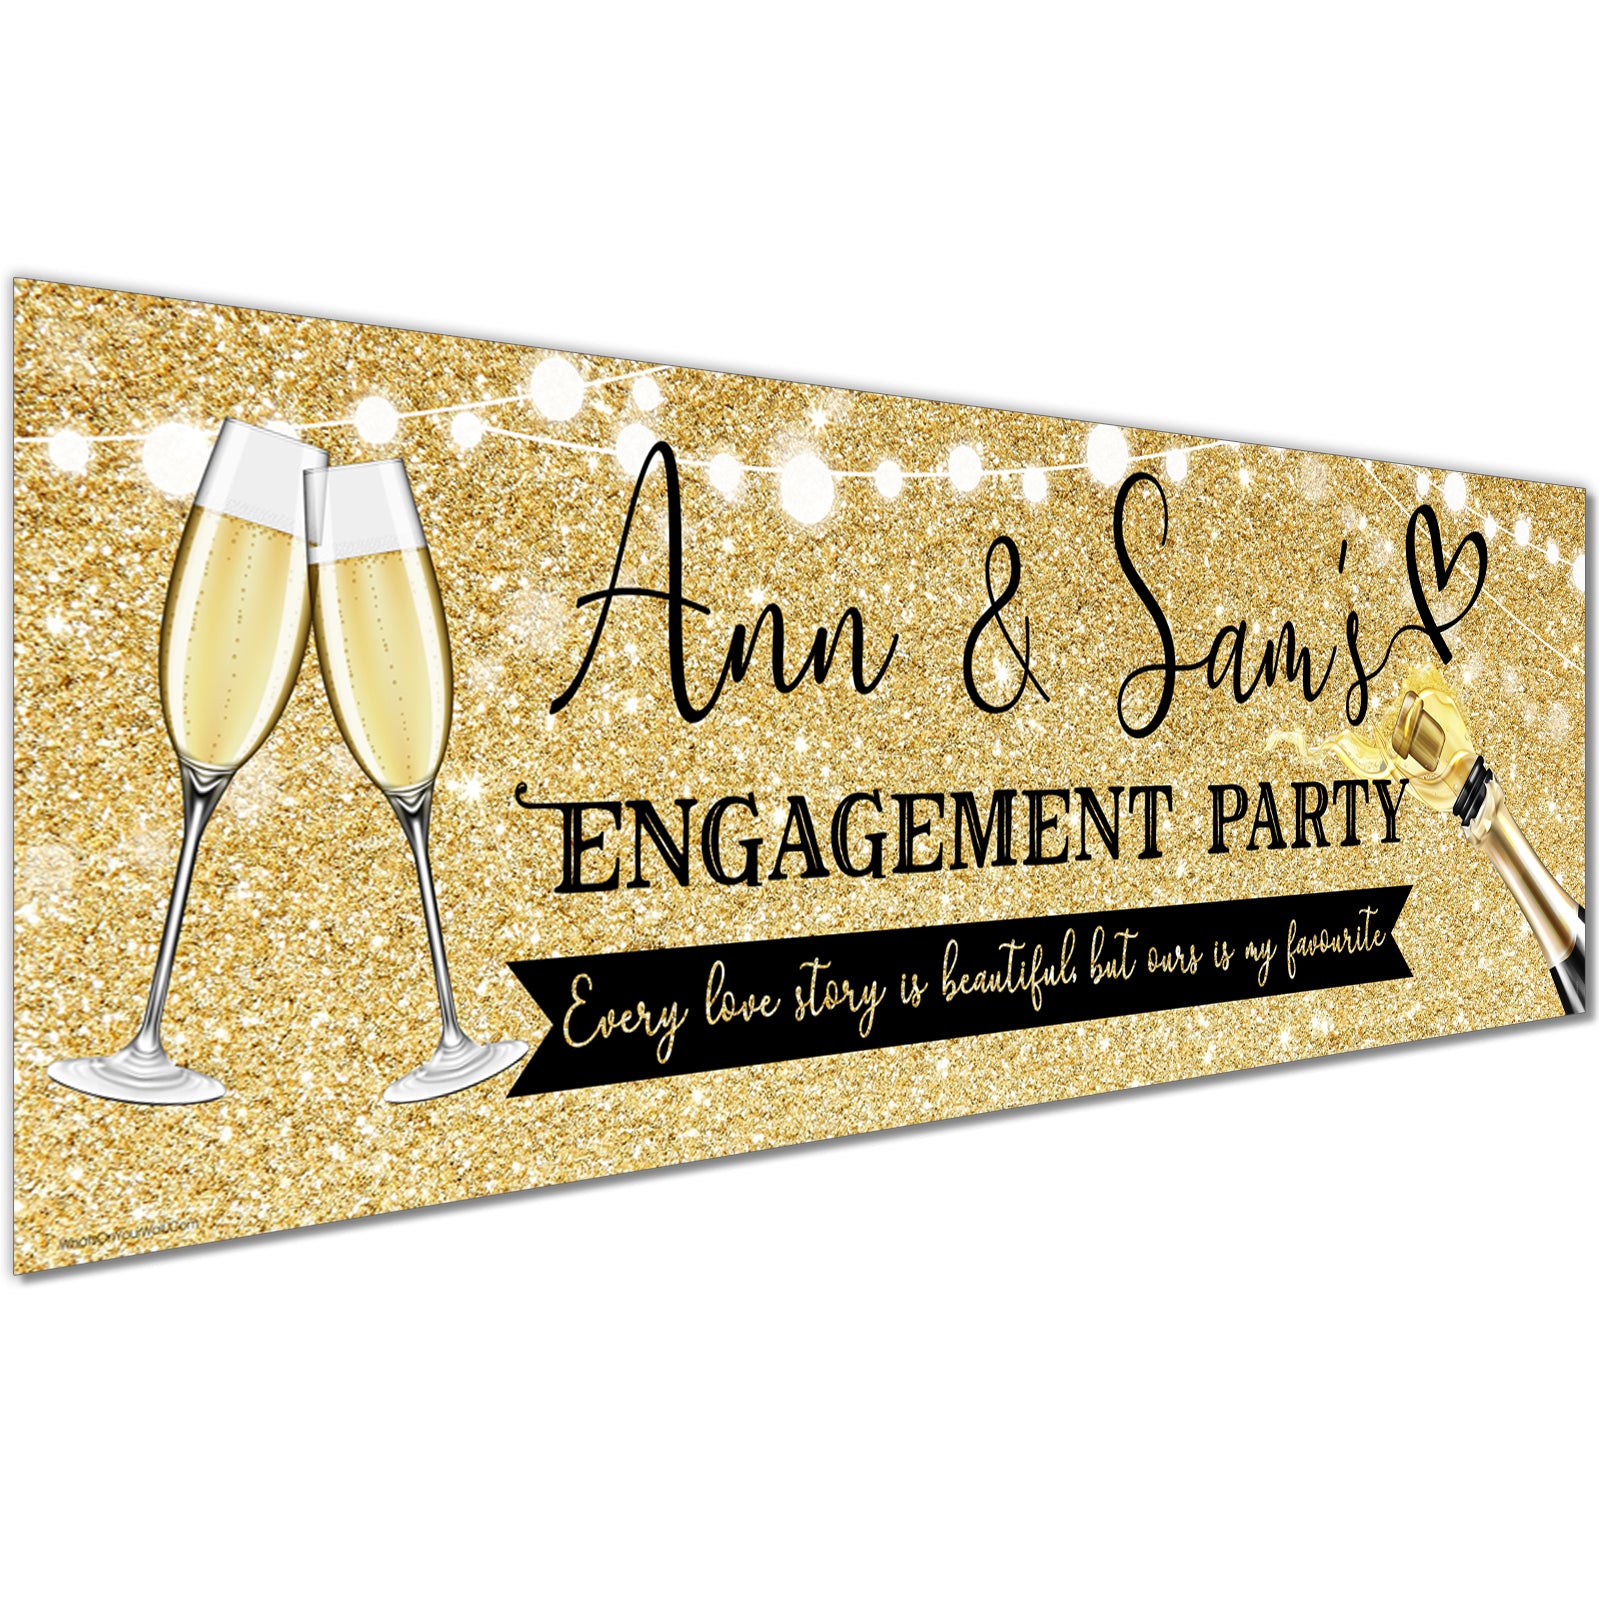 Personalised Engagement Banners in Black Gold Design